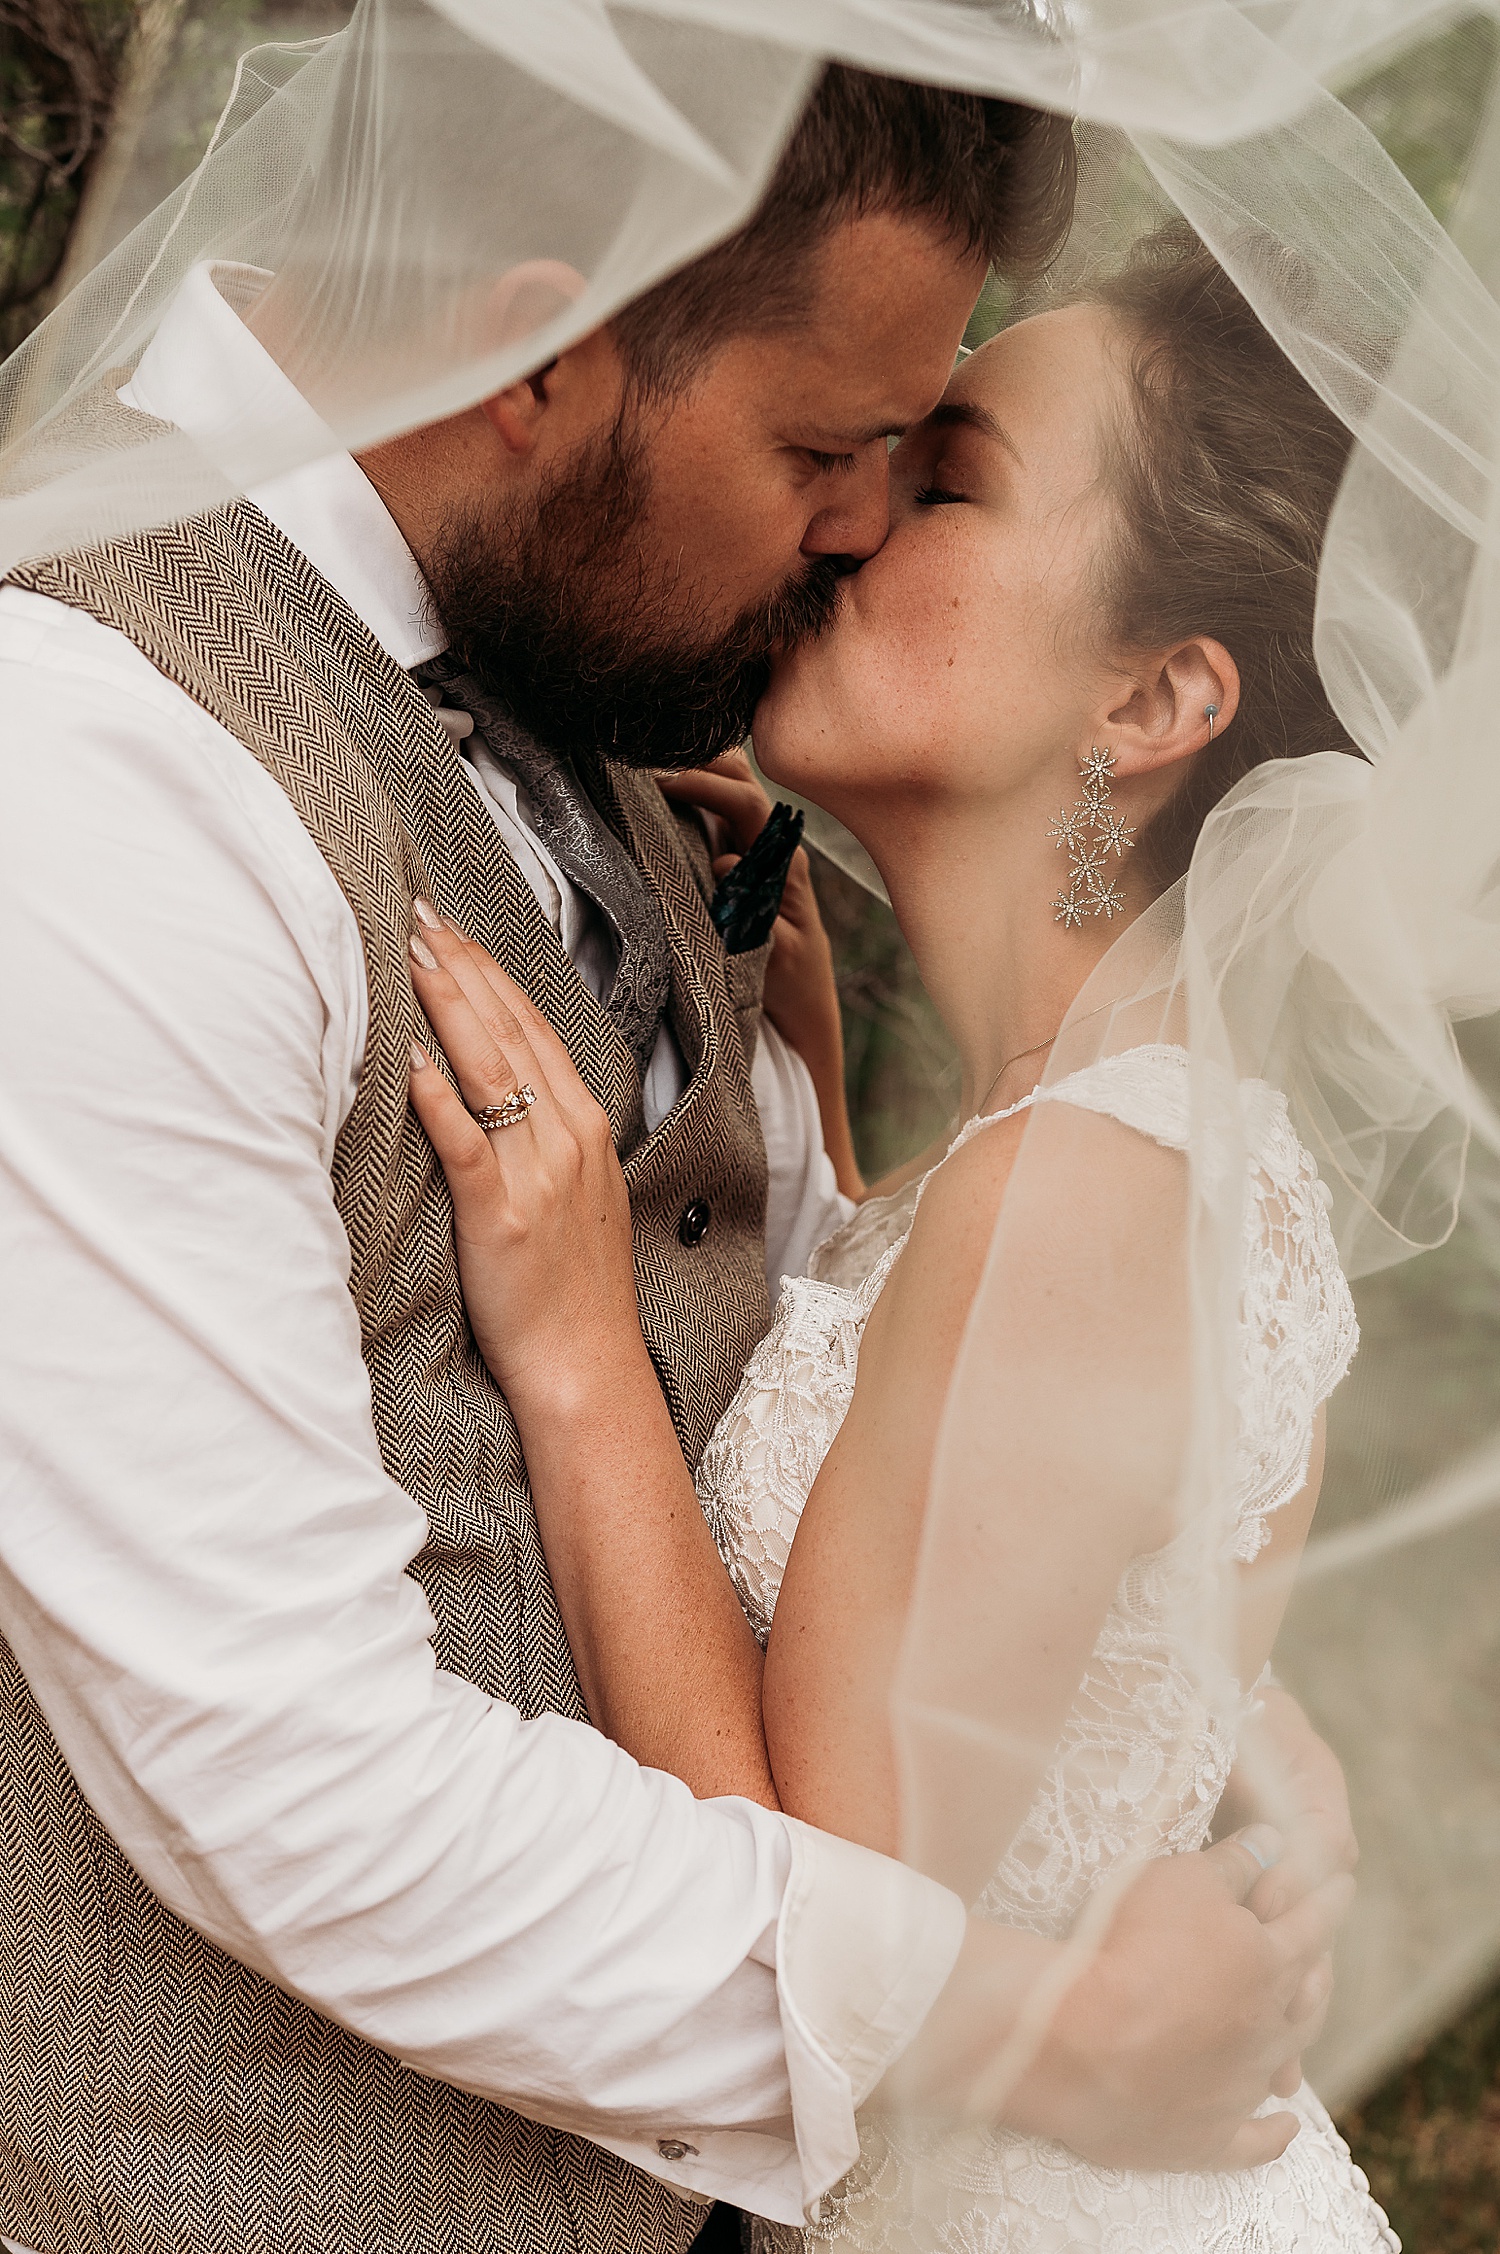 bride wears long veil and long earrings on wedding day while kissing new husband 